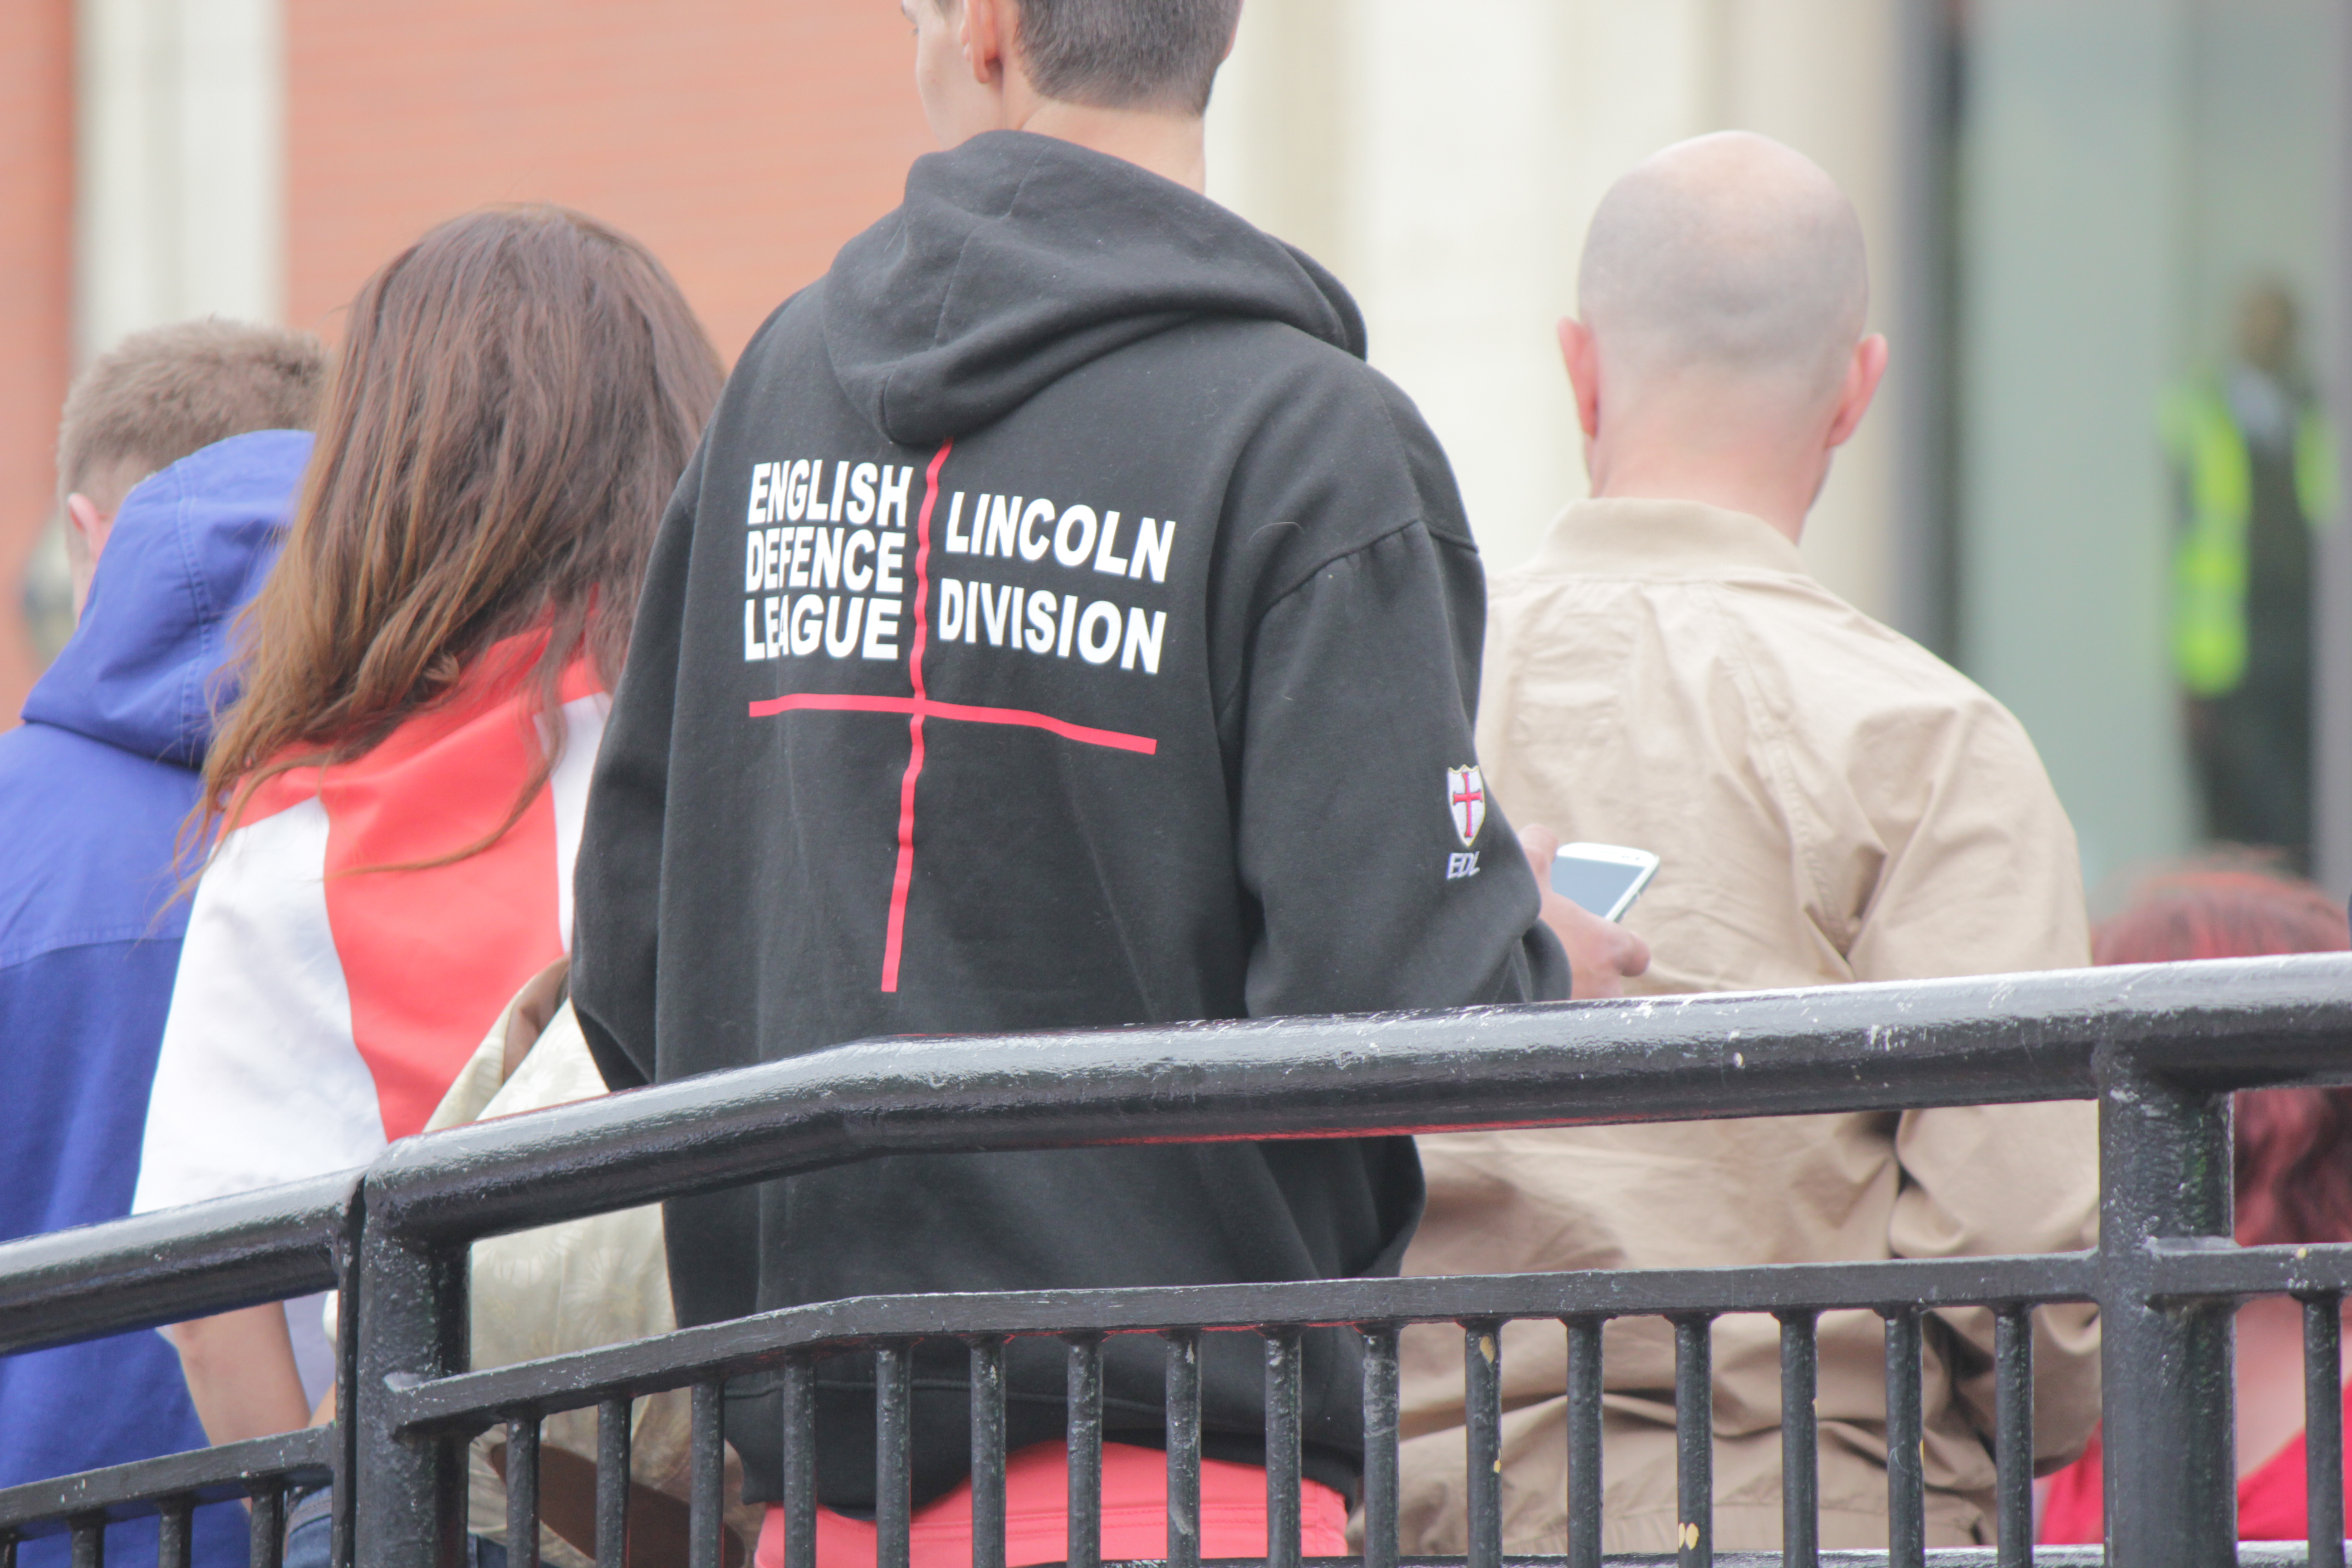 EDL hoodie The Linc